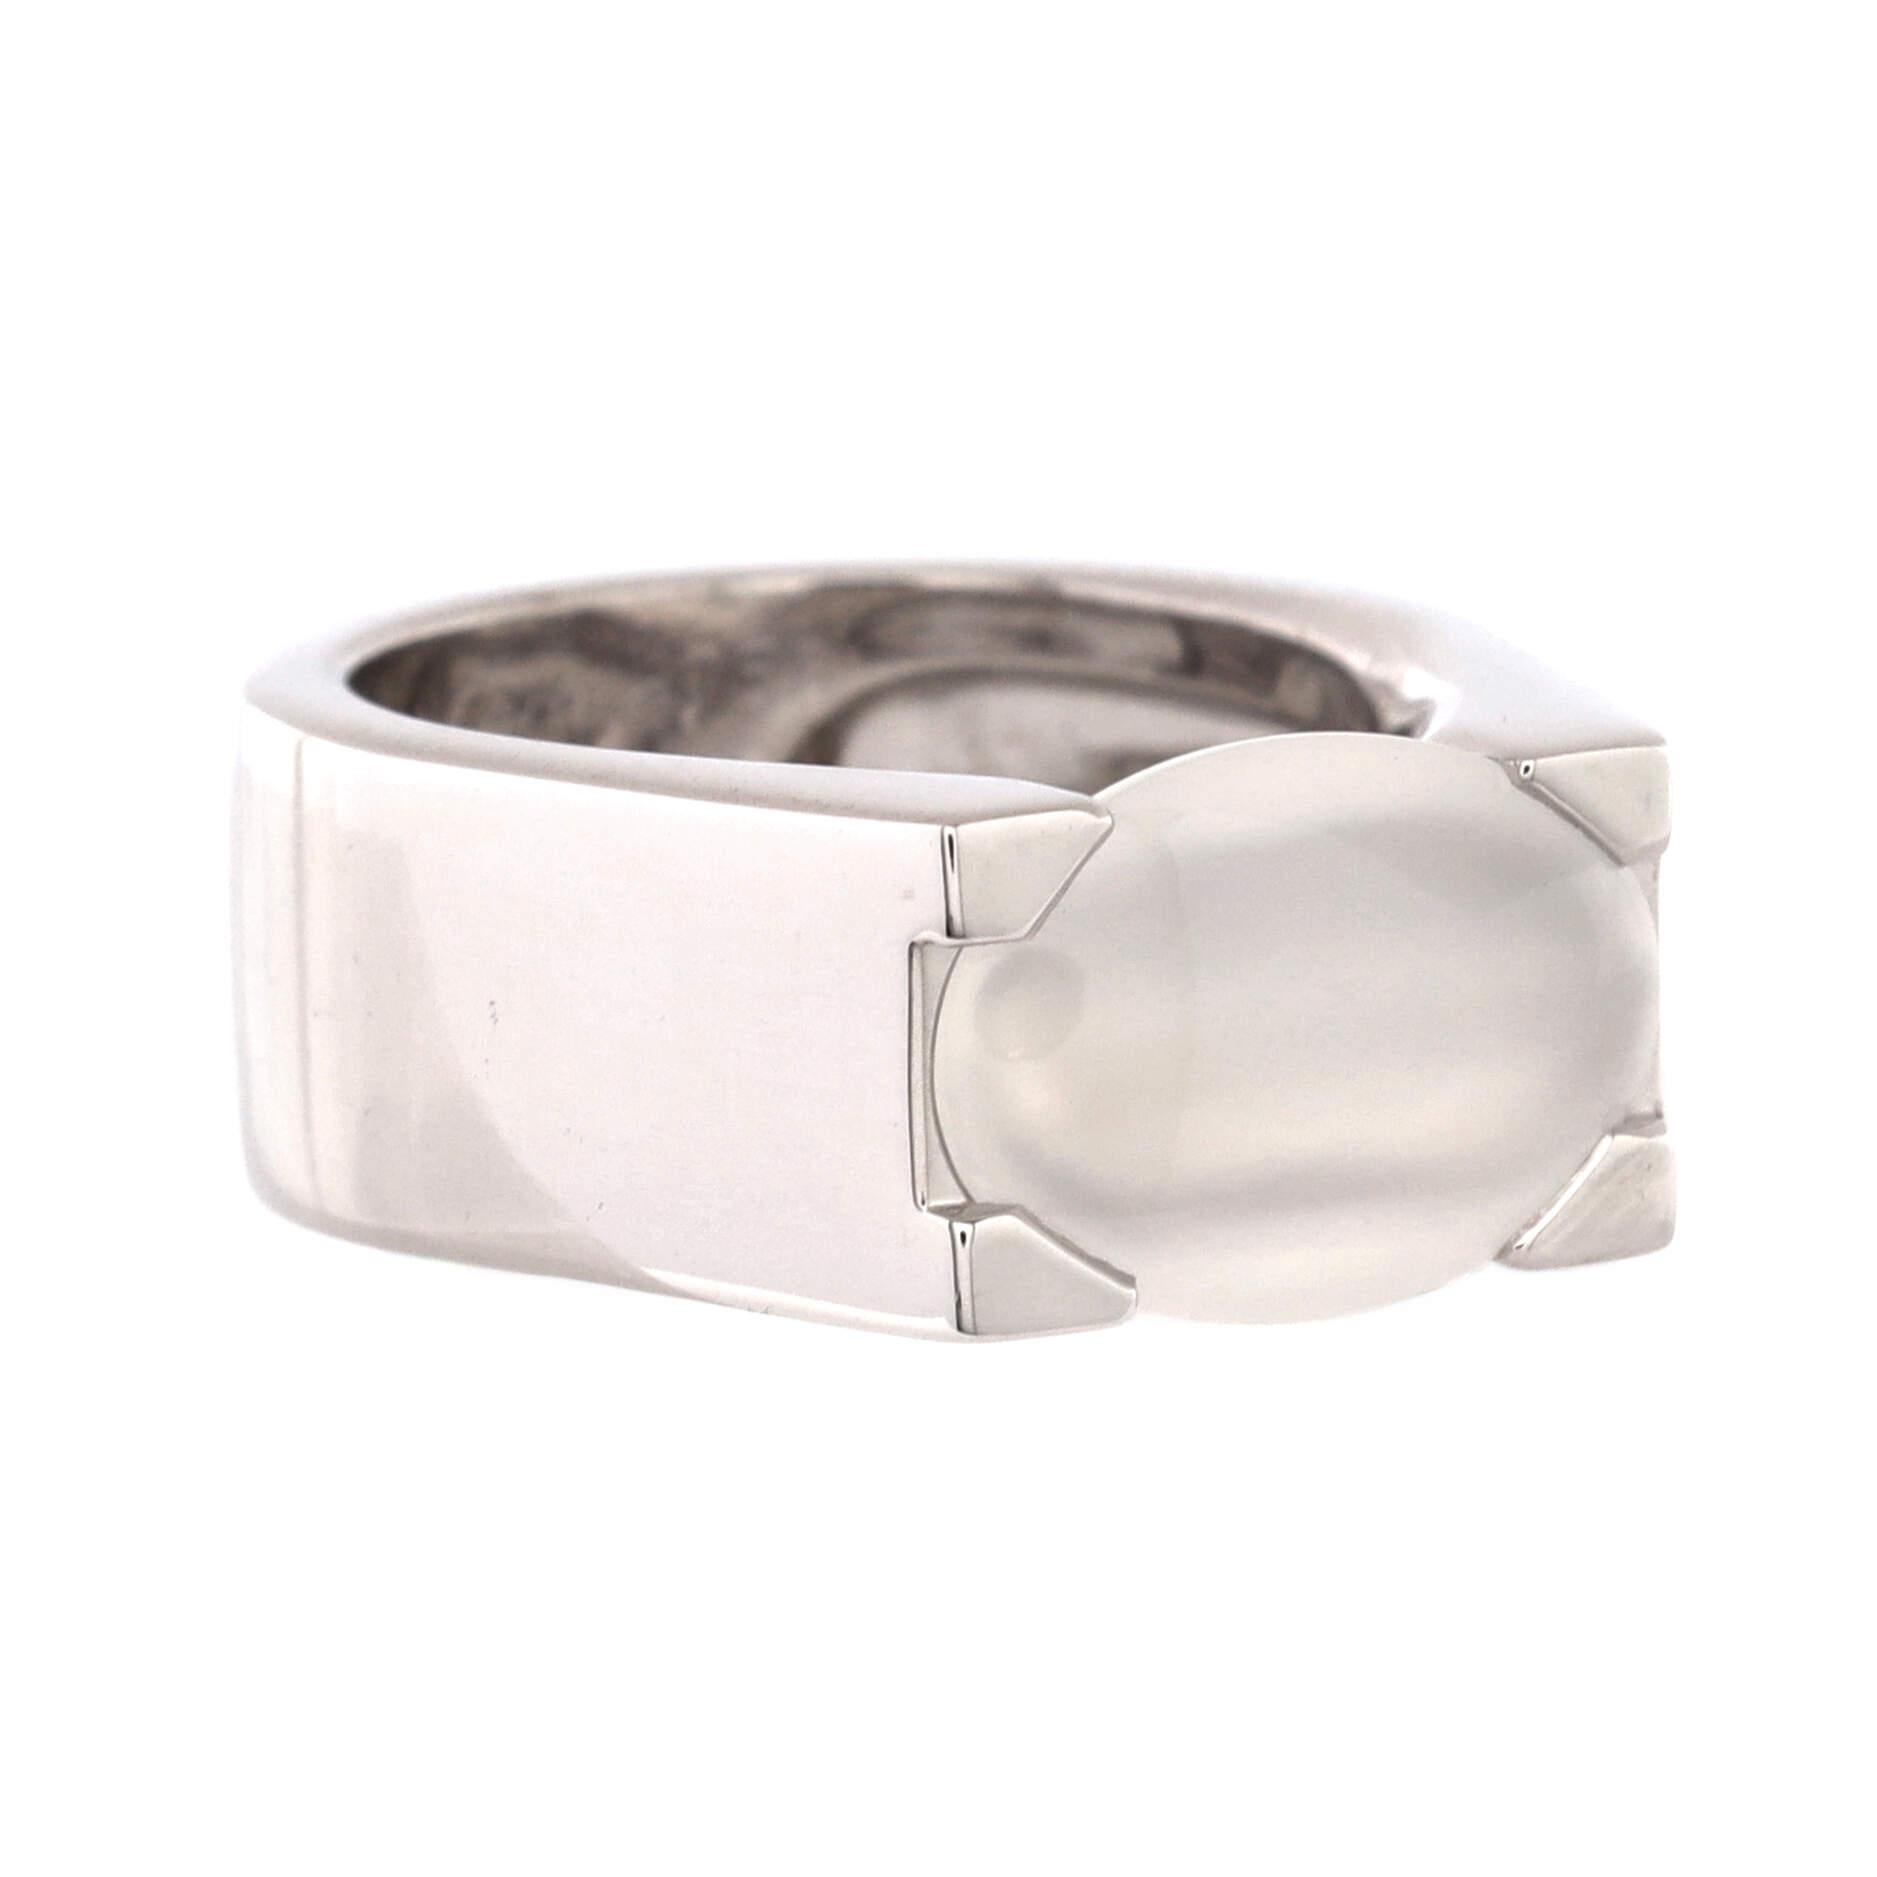 Condition: Very good. Moderate wear throughout with slightly polished hallmarks.
Accessories: No Accessories
Measurements: Size: 6.75 - 54, Width: 9.25 mm
Designer: Cartier
Model: Oval Tank Ring 18K White Gold with Moonstone
Exterior Color: White